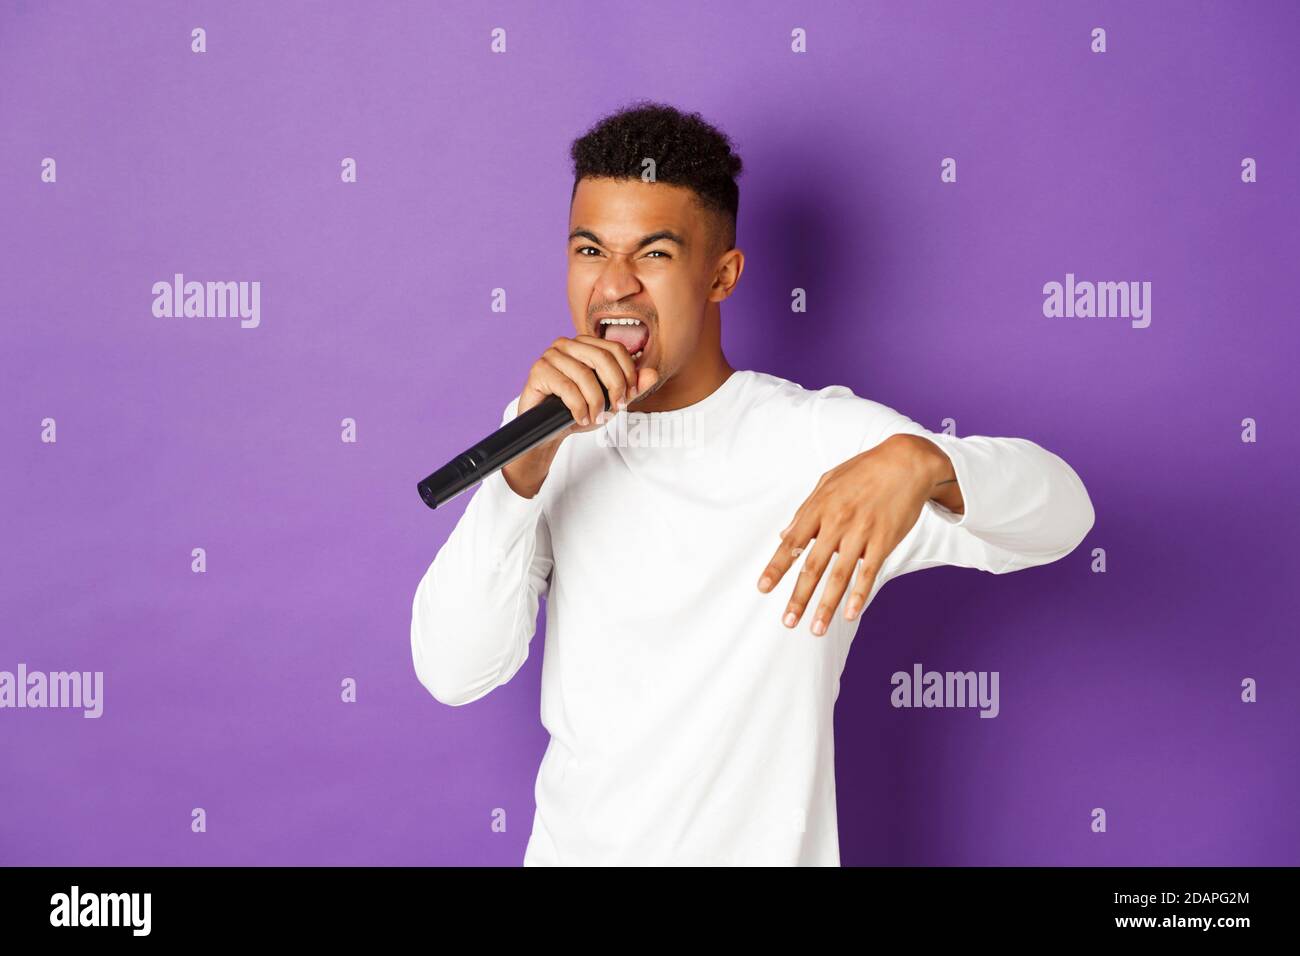 Image of sassy african-american guy singing in microphone, rapping and performing on stage, standing over purple background Stock Photo